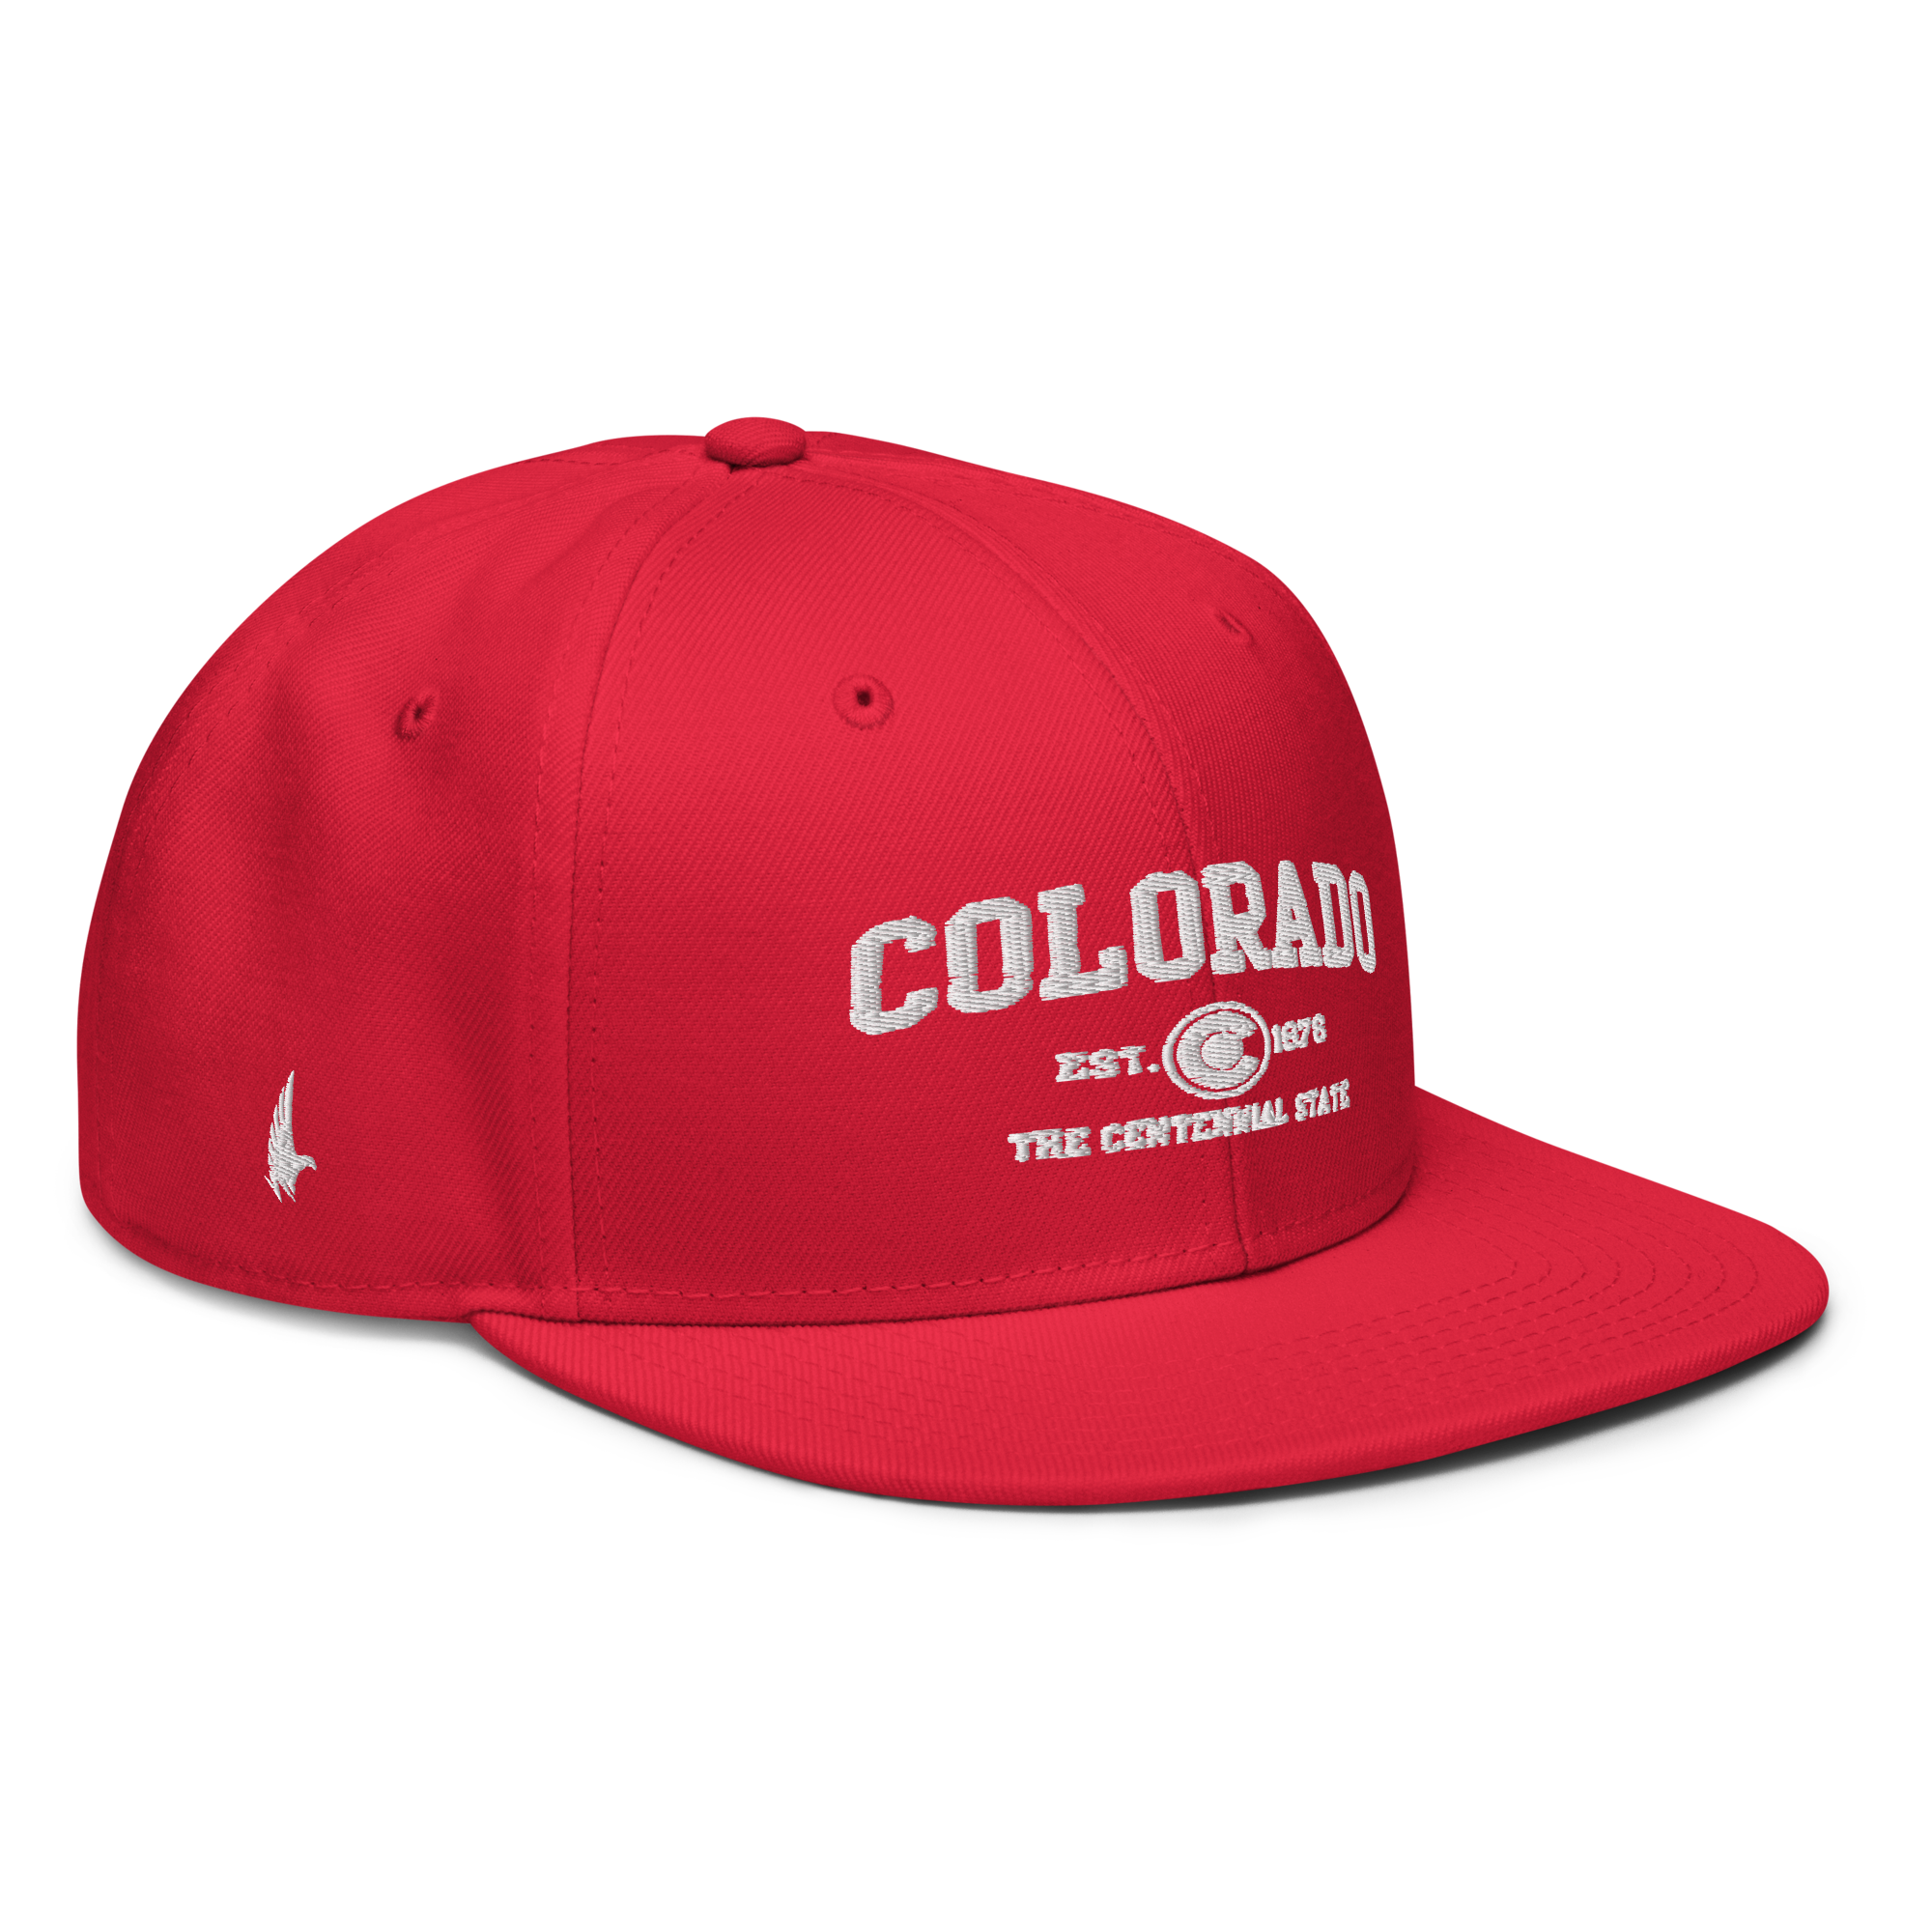 Sportswear Colorado Snapback Hat - Red/White OS - Loyalty Vibes